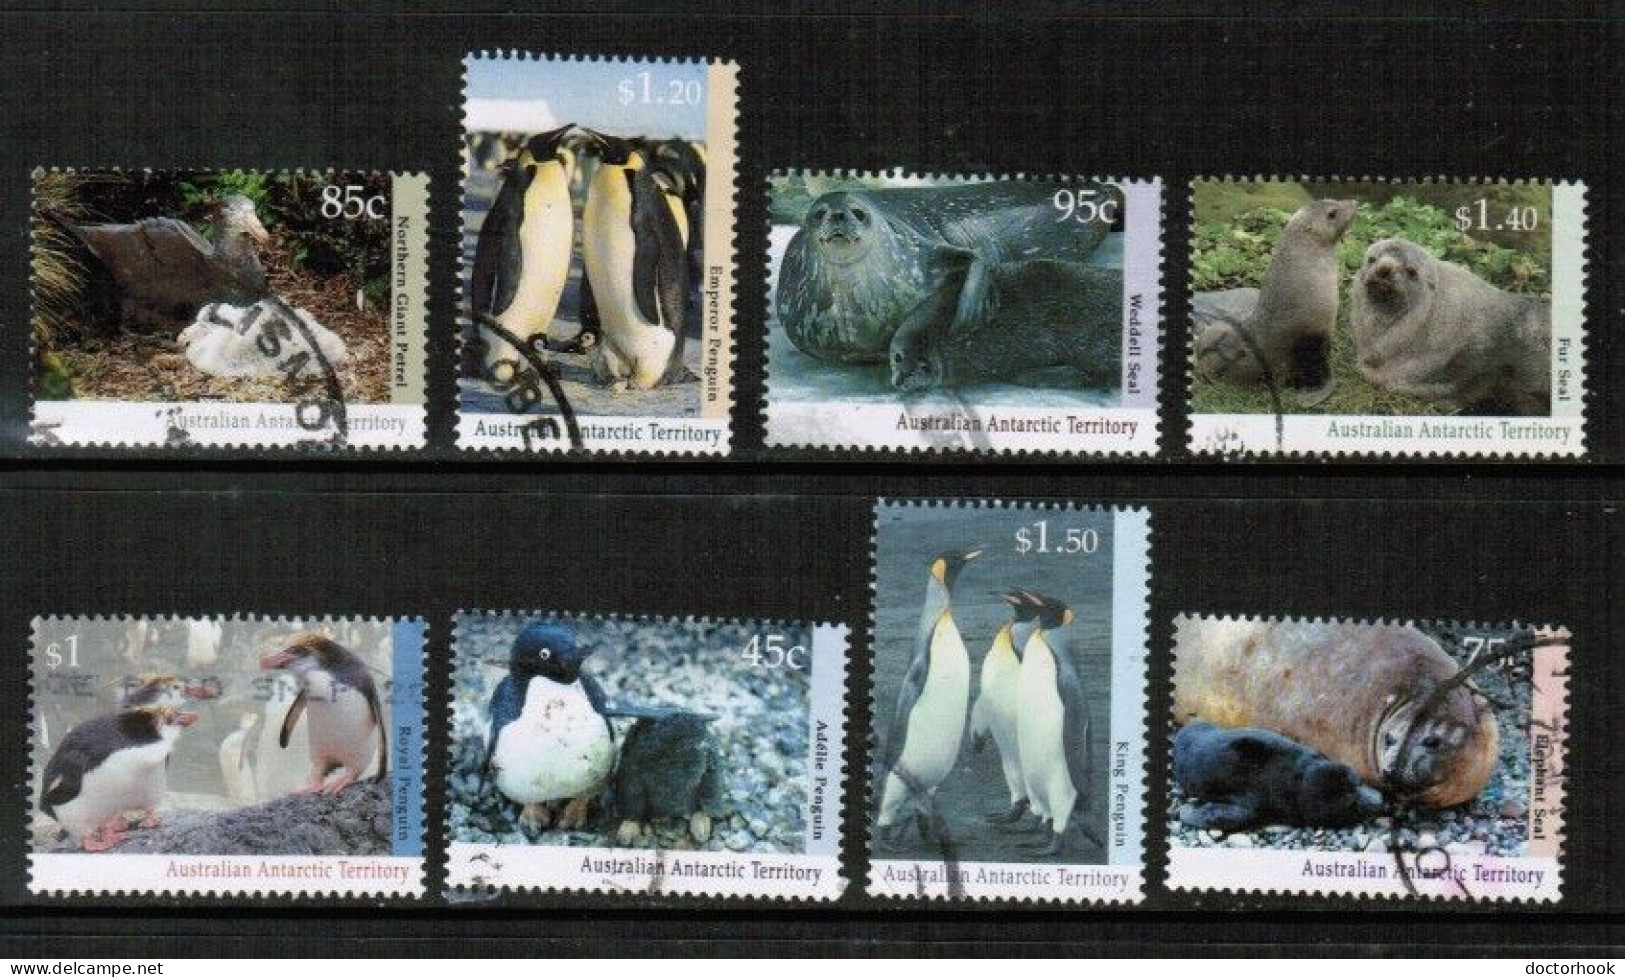 AUSTRALIAN ANTARCTIC TERRITORY   Scott # L 83-9 USED (CONDITION AS PER SCAN) (Stamp Scan # 928-1) - Gebraucht